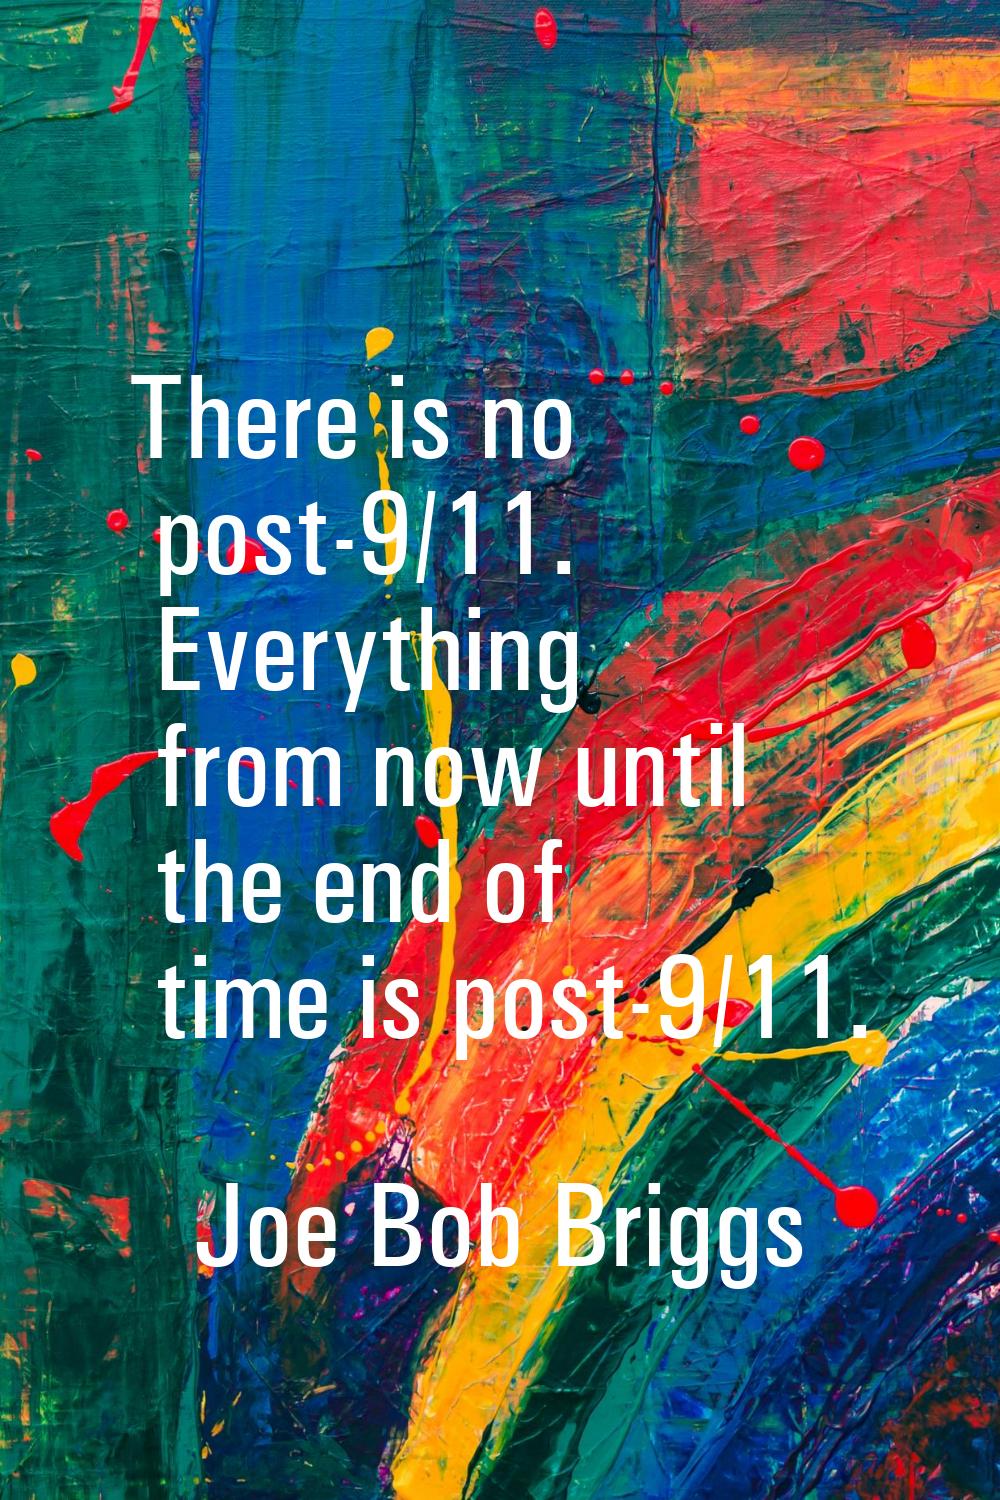 There is no post-9/11. Everything from now until the end of time is post-9/11.